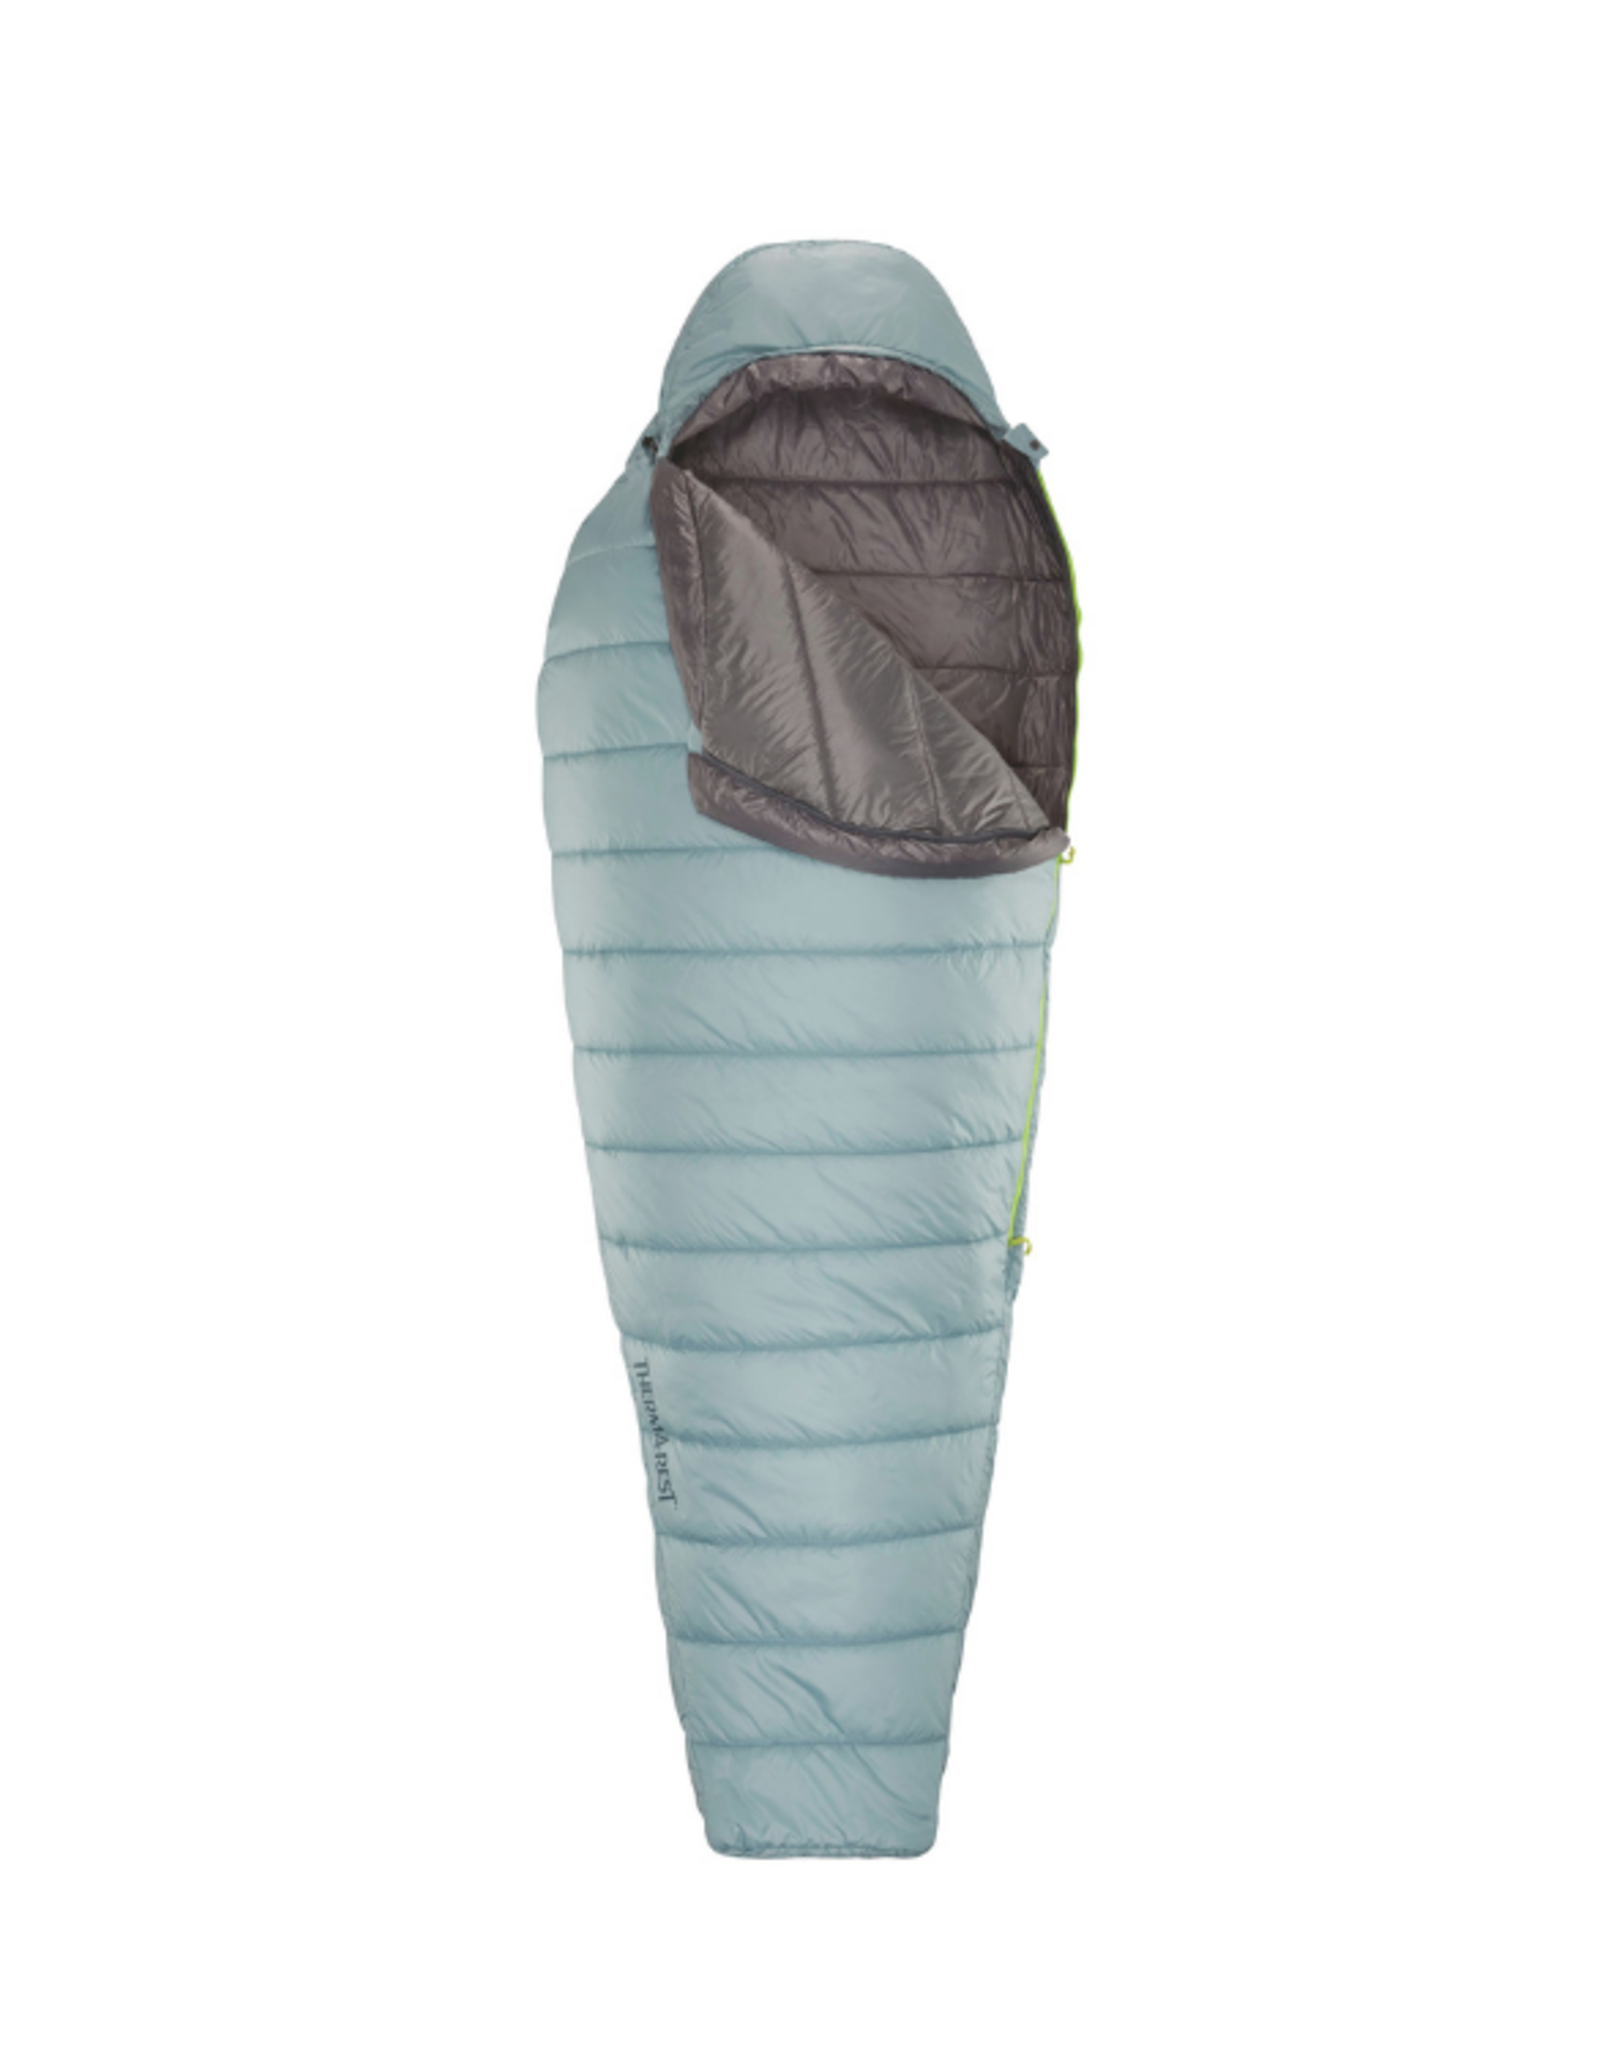 Therm-a-Rest Therm-a-rest Space Cowboy 45 Sleeping Bag Regular